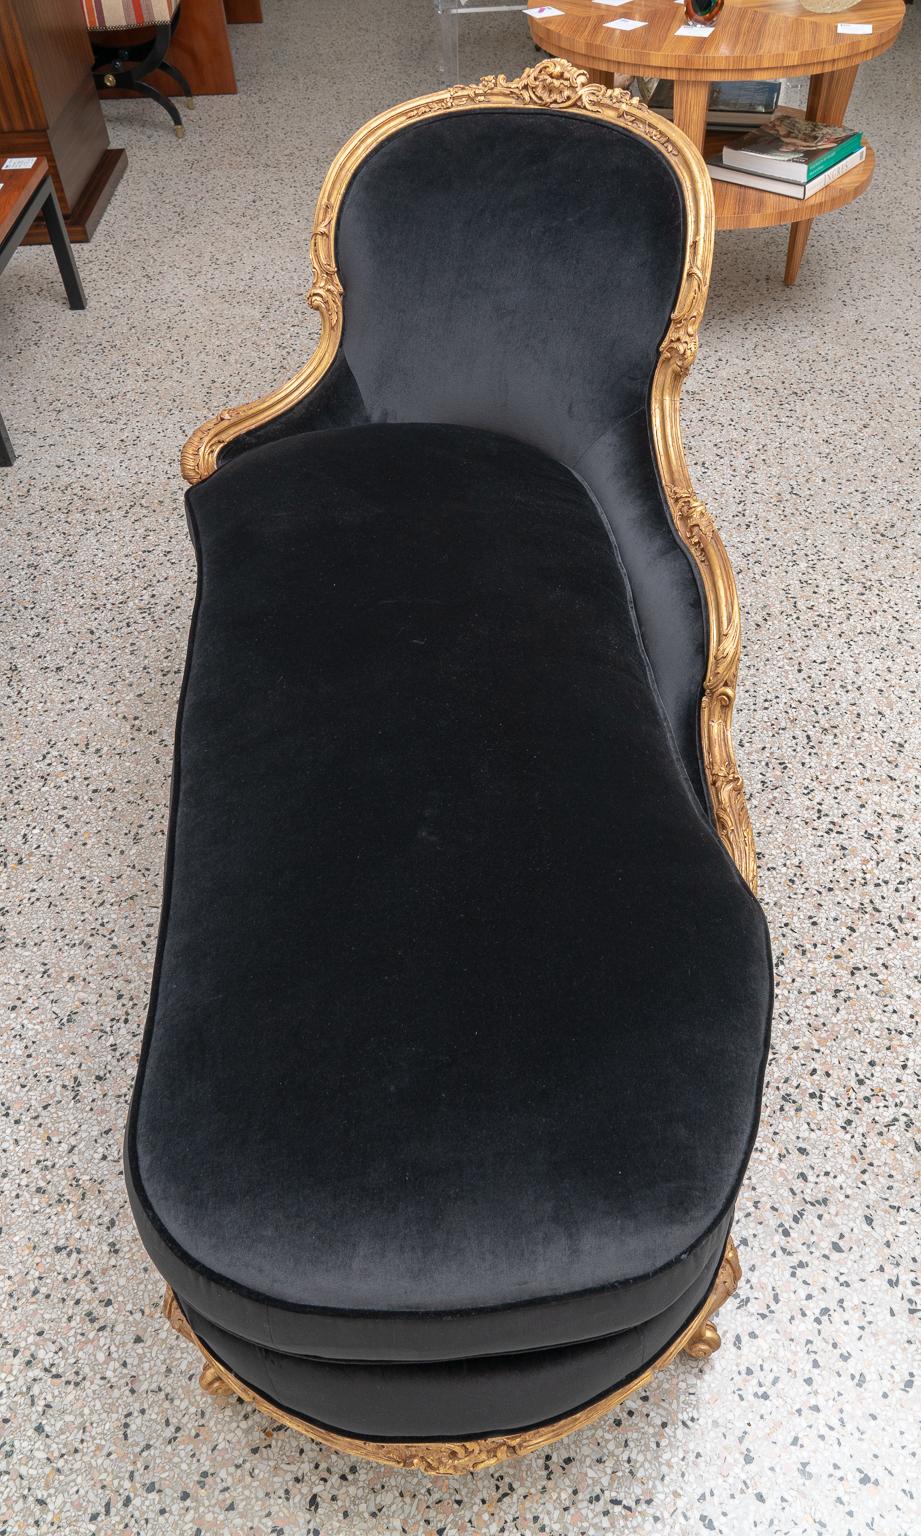 This stylish and chic Louis XV giltwood chaise was purchased for a Palm Beach collector in London and has been professionally restored and upholstered in a woven, black velvet upholstery.